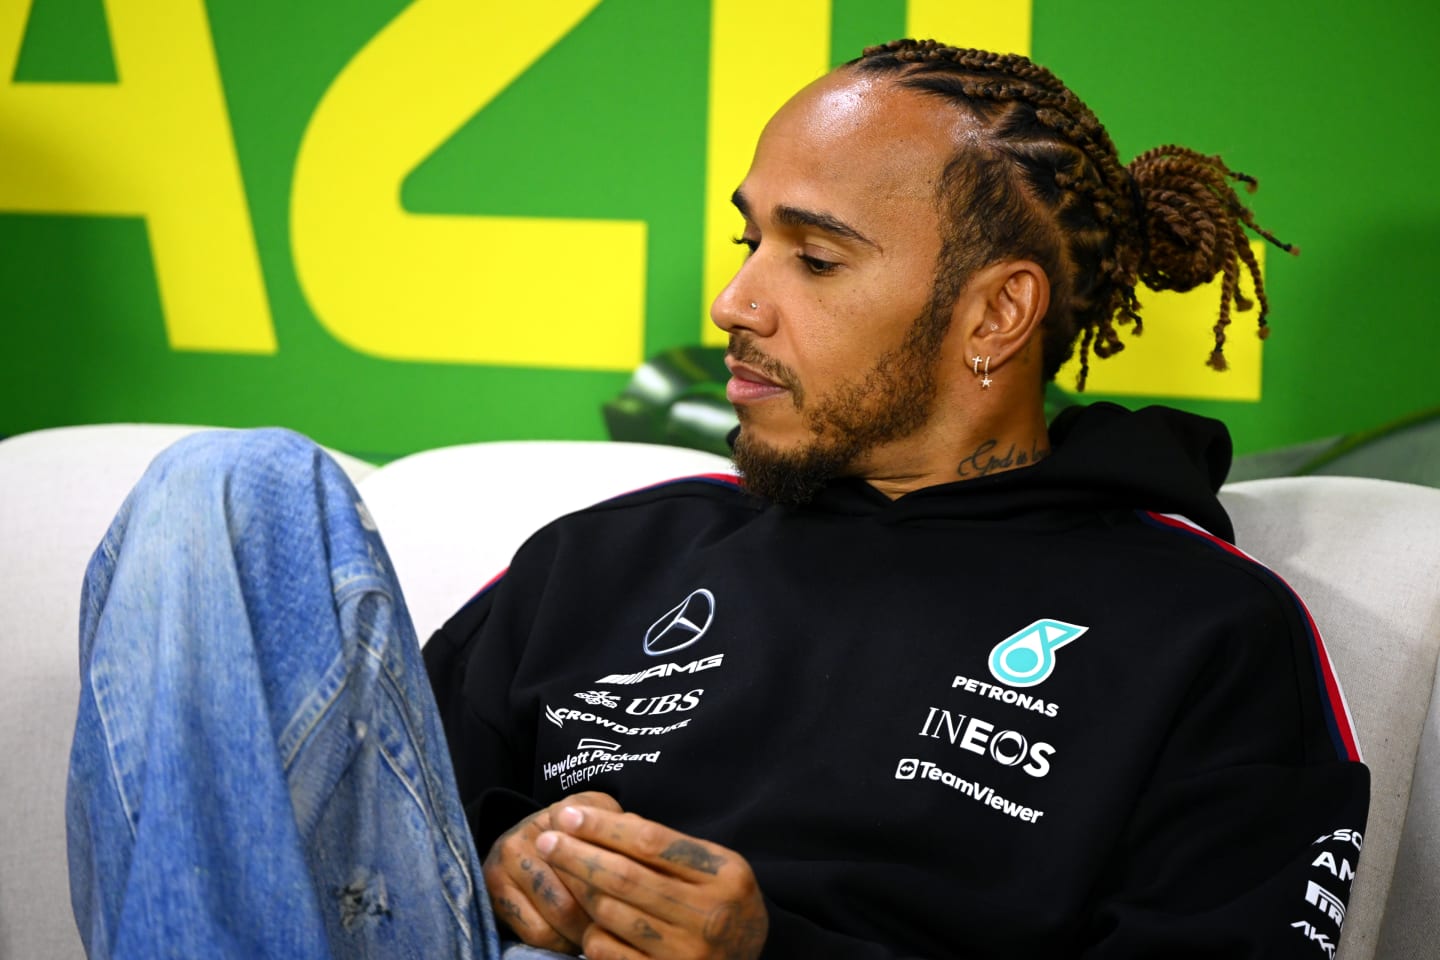 SAO PAULO, BRAZIL - NOVEMBER 02: Lewis Hamilton of Great Britain and Mercedes looks on in the Drivers Press Conference during previews ahead of the F1 Grand Prix of Brazil at Autodromo Jose Carlos Pace on November 02, 2023 in Sao Paulo, Brazil. (Photo by Clive Mason/Getty Images)